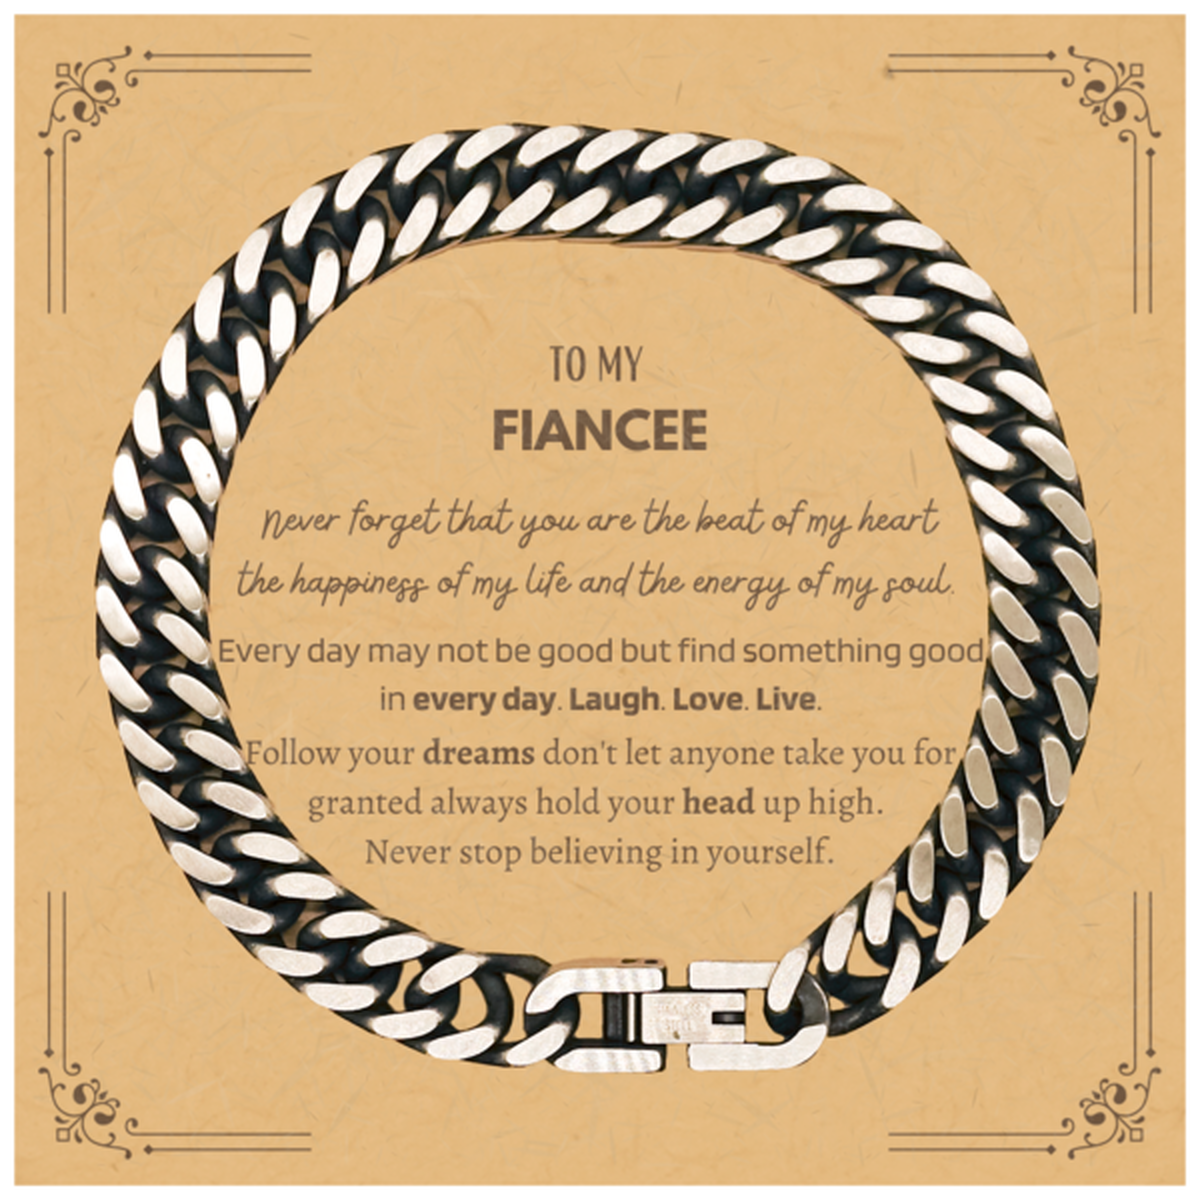 To My Fiancee Message Card Gifts, Christmas Fiancee Cuban Link Chain Bracelet Present, Birthday Unique Motivational For Fiancee, To My Fiancee Never forget that you are the beat of my heart the happiness of my life and the energy of my soul